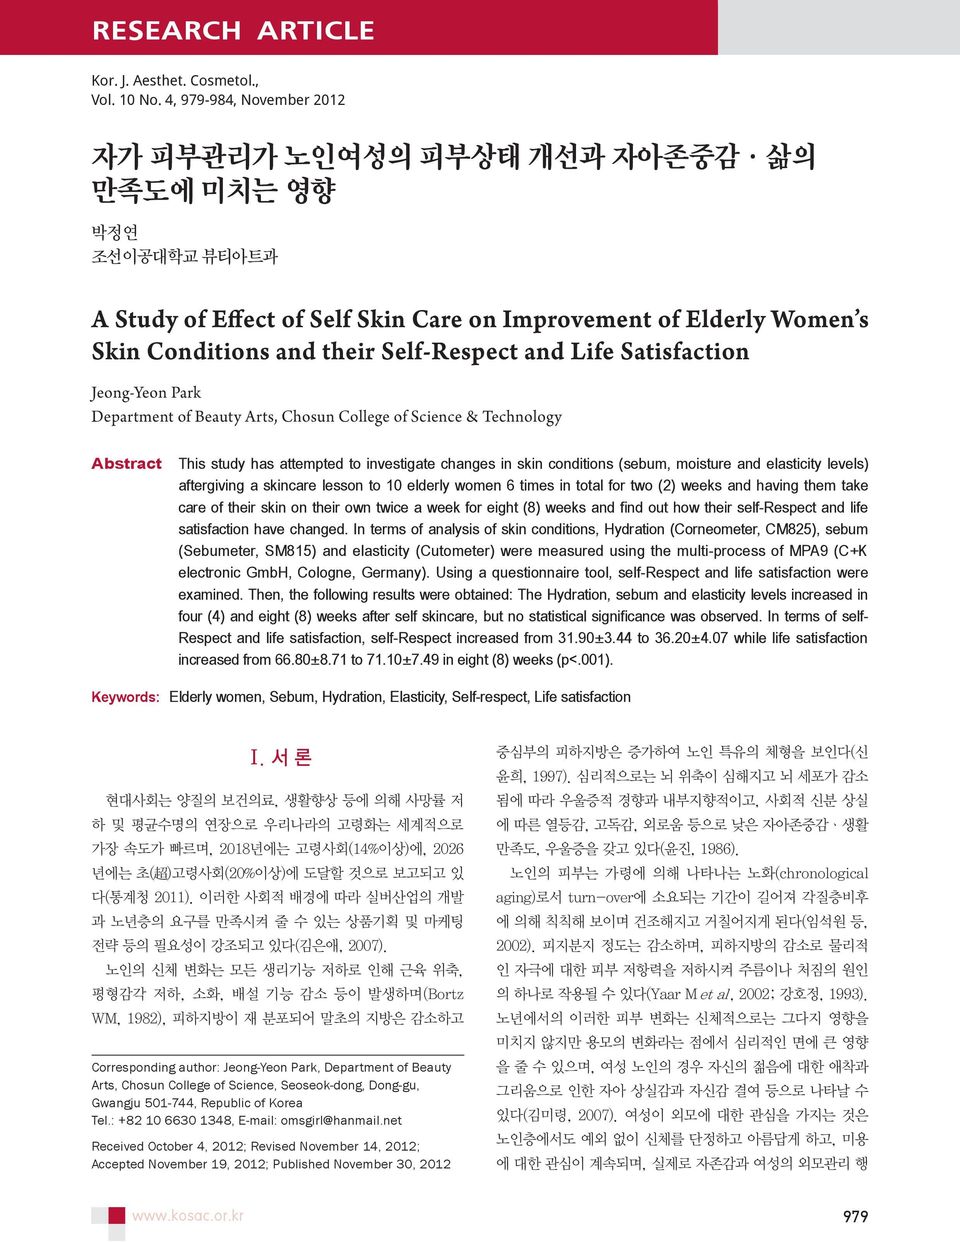 Jeong-Yeon ark Department of Beauty Arts, Chosun College of Science & Technology Abstract This study has attempted to investigate changes in skin conditions (sebum, moisture and elasticity levels)